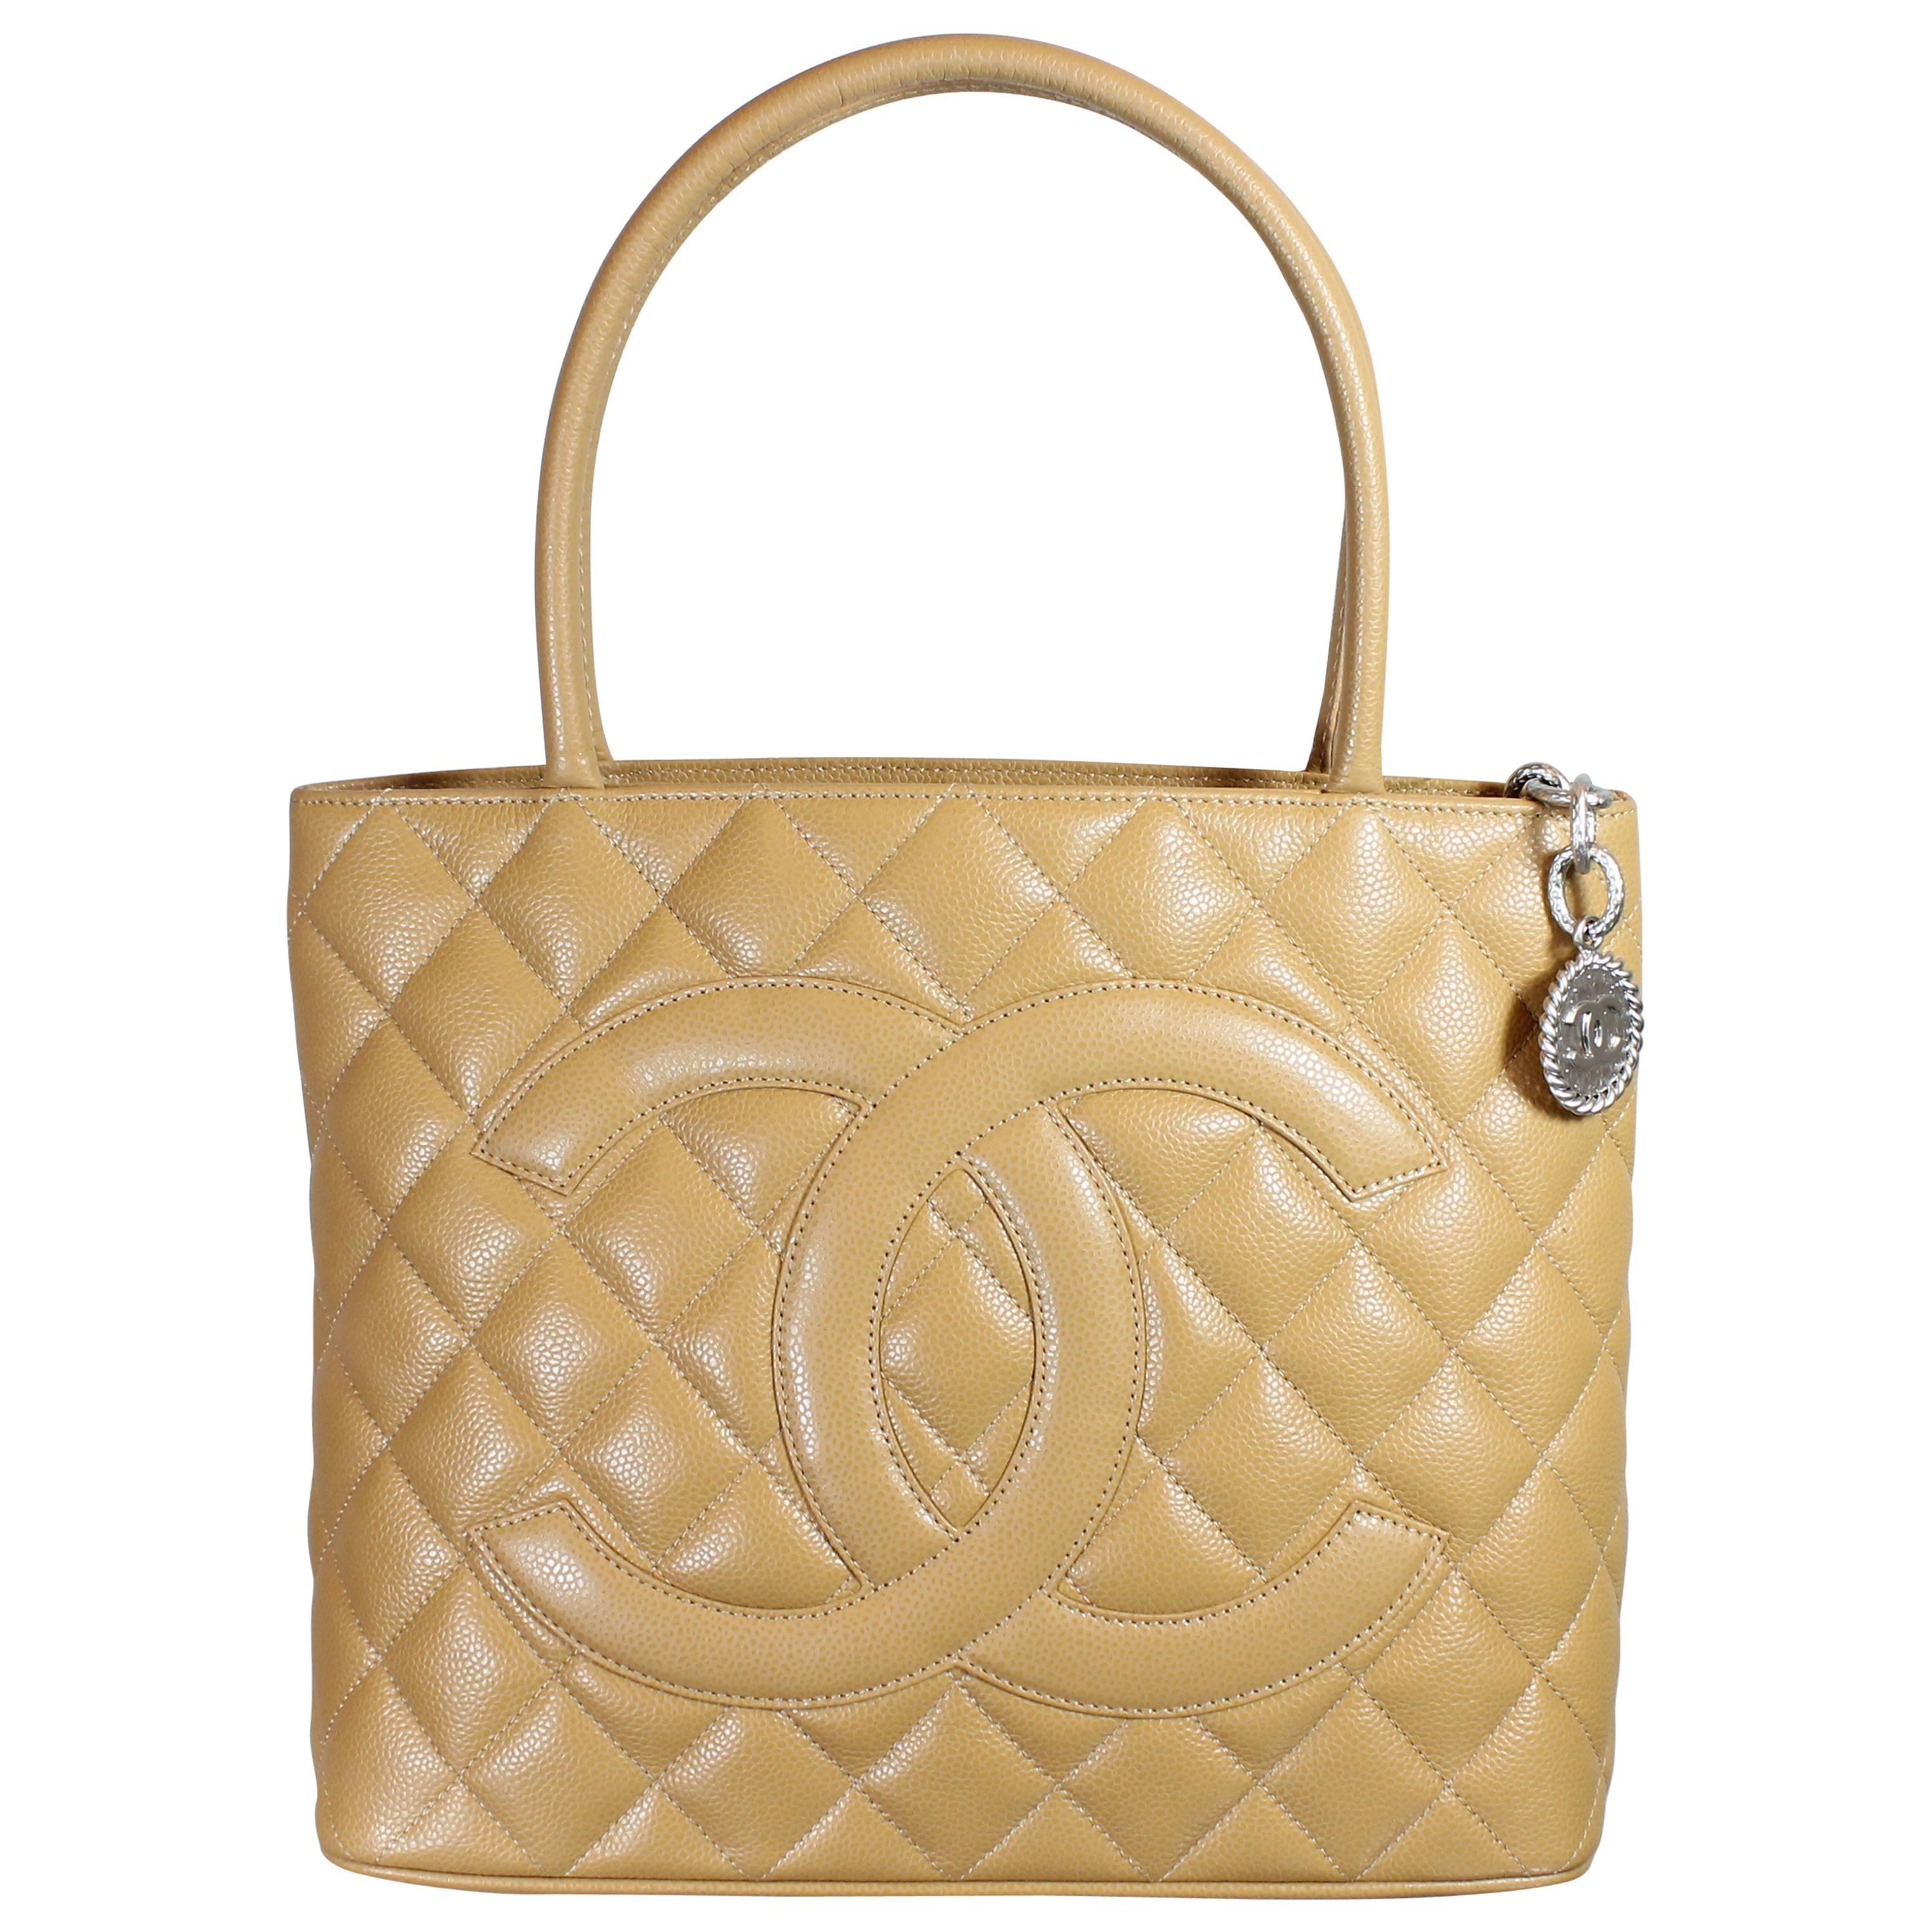 Brand New With Tags - Chanel 2000 Beige Classic Medallion Tote Bag For Sale